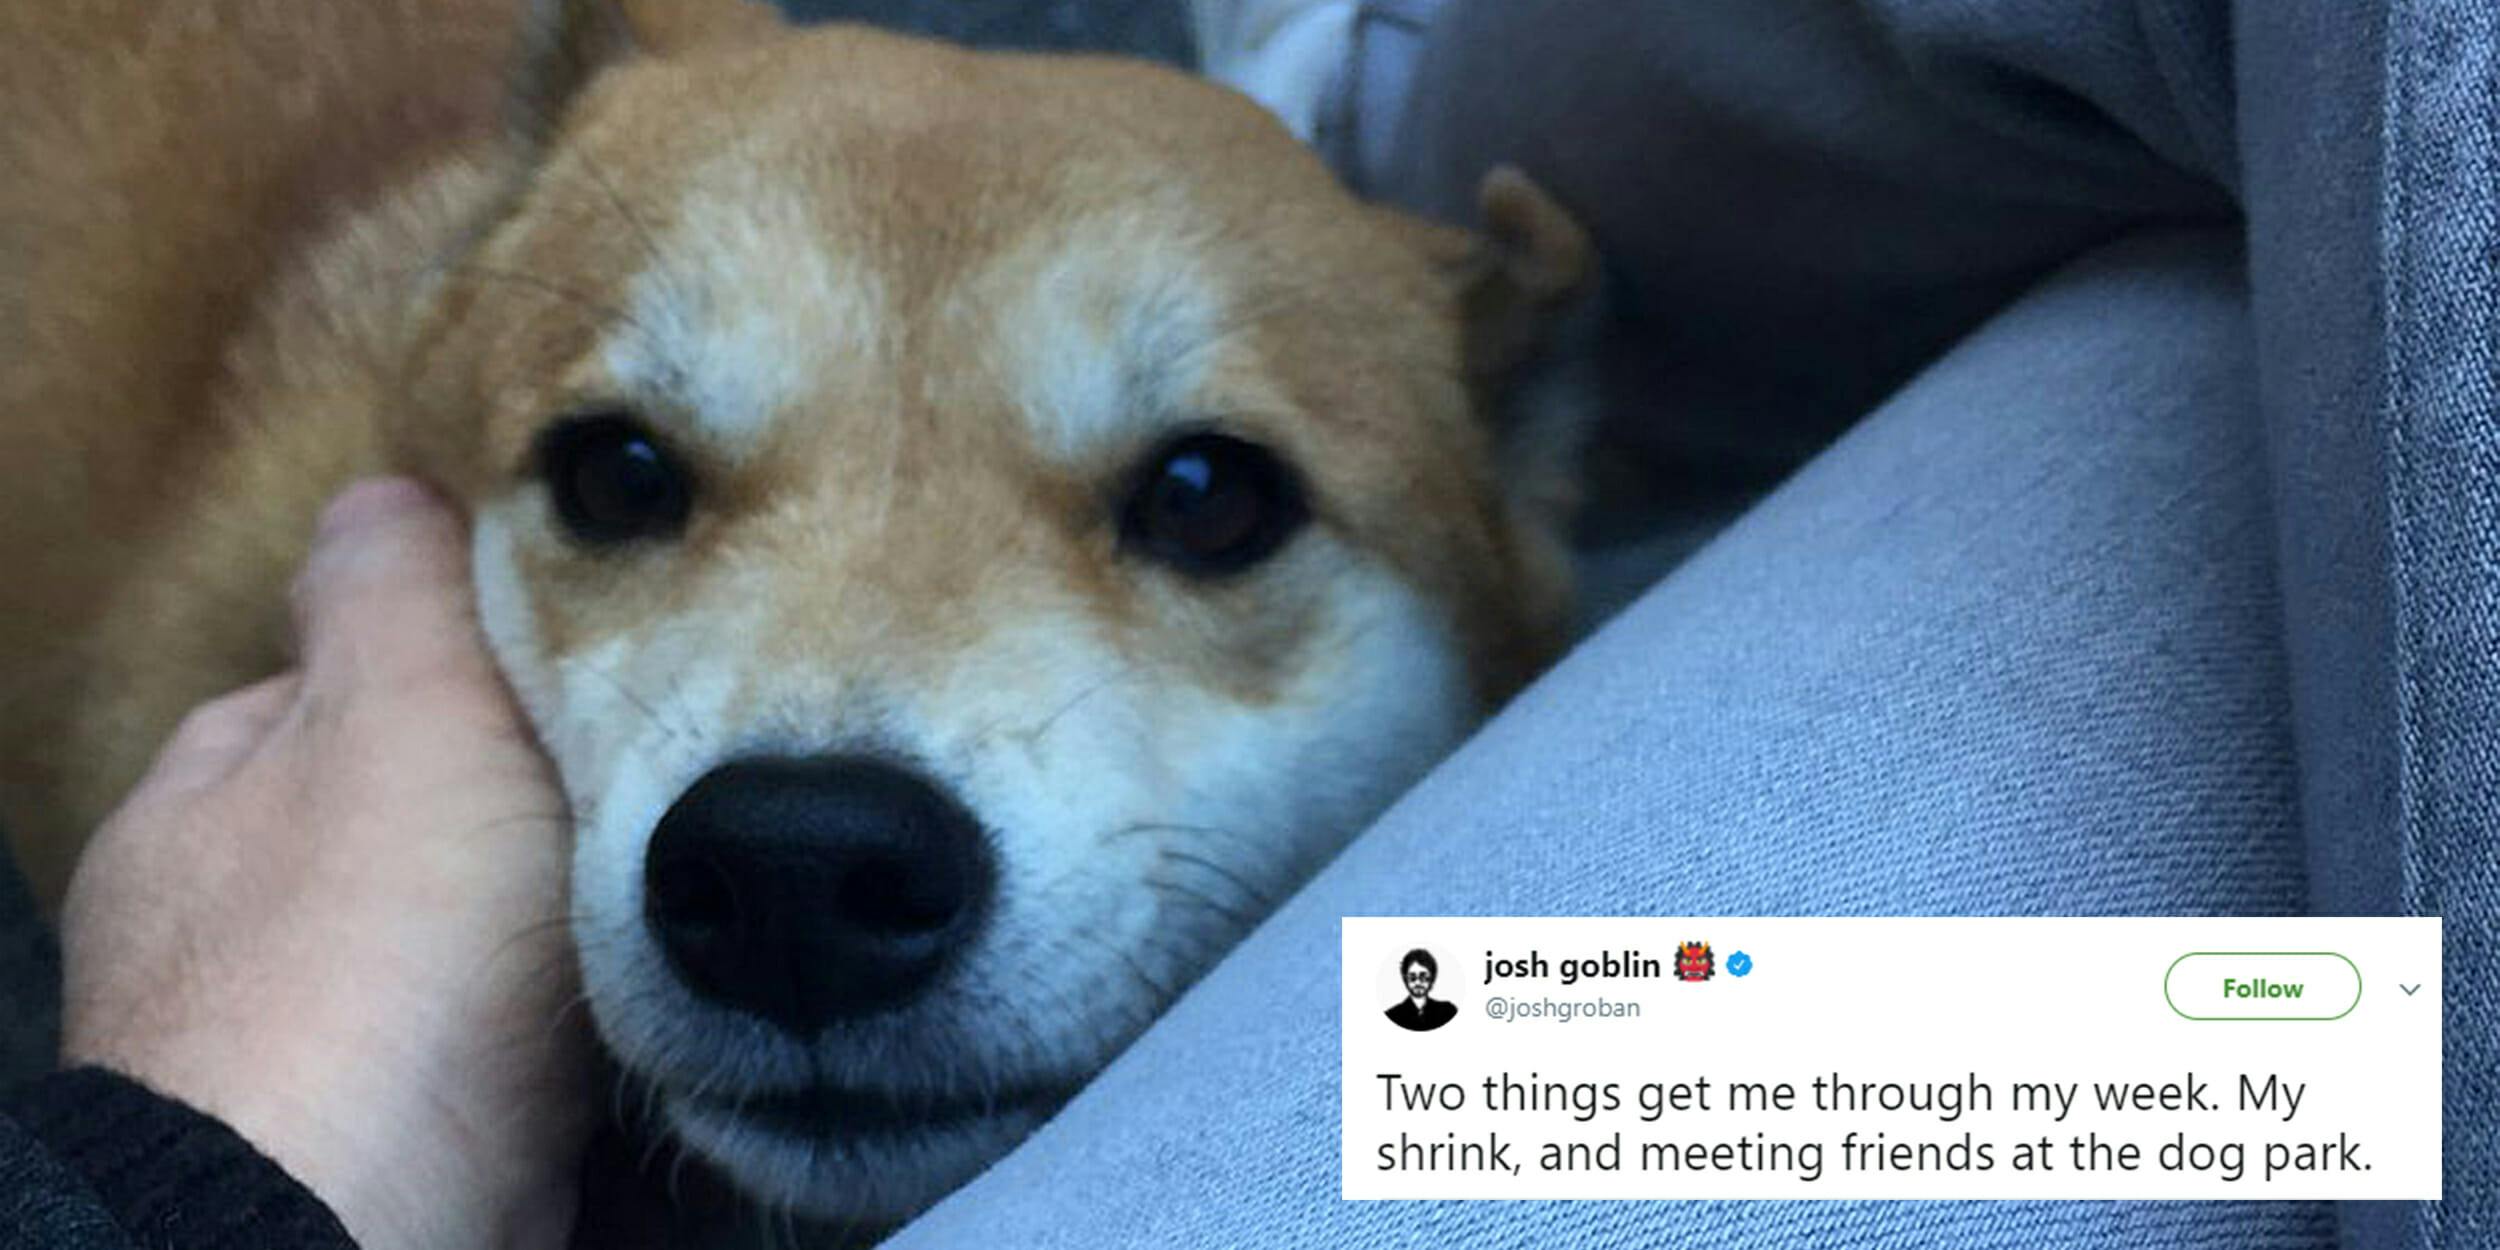 Josh Groban tweet at dog park before shooting "Two things get me through my week. My shrink, and meeting friends at the dog park."